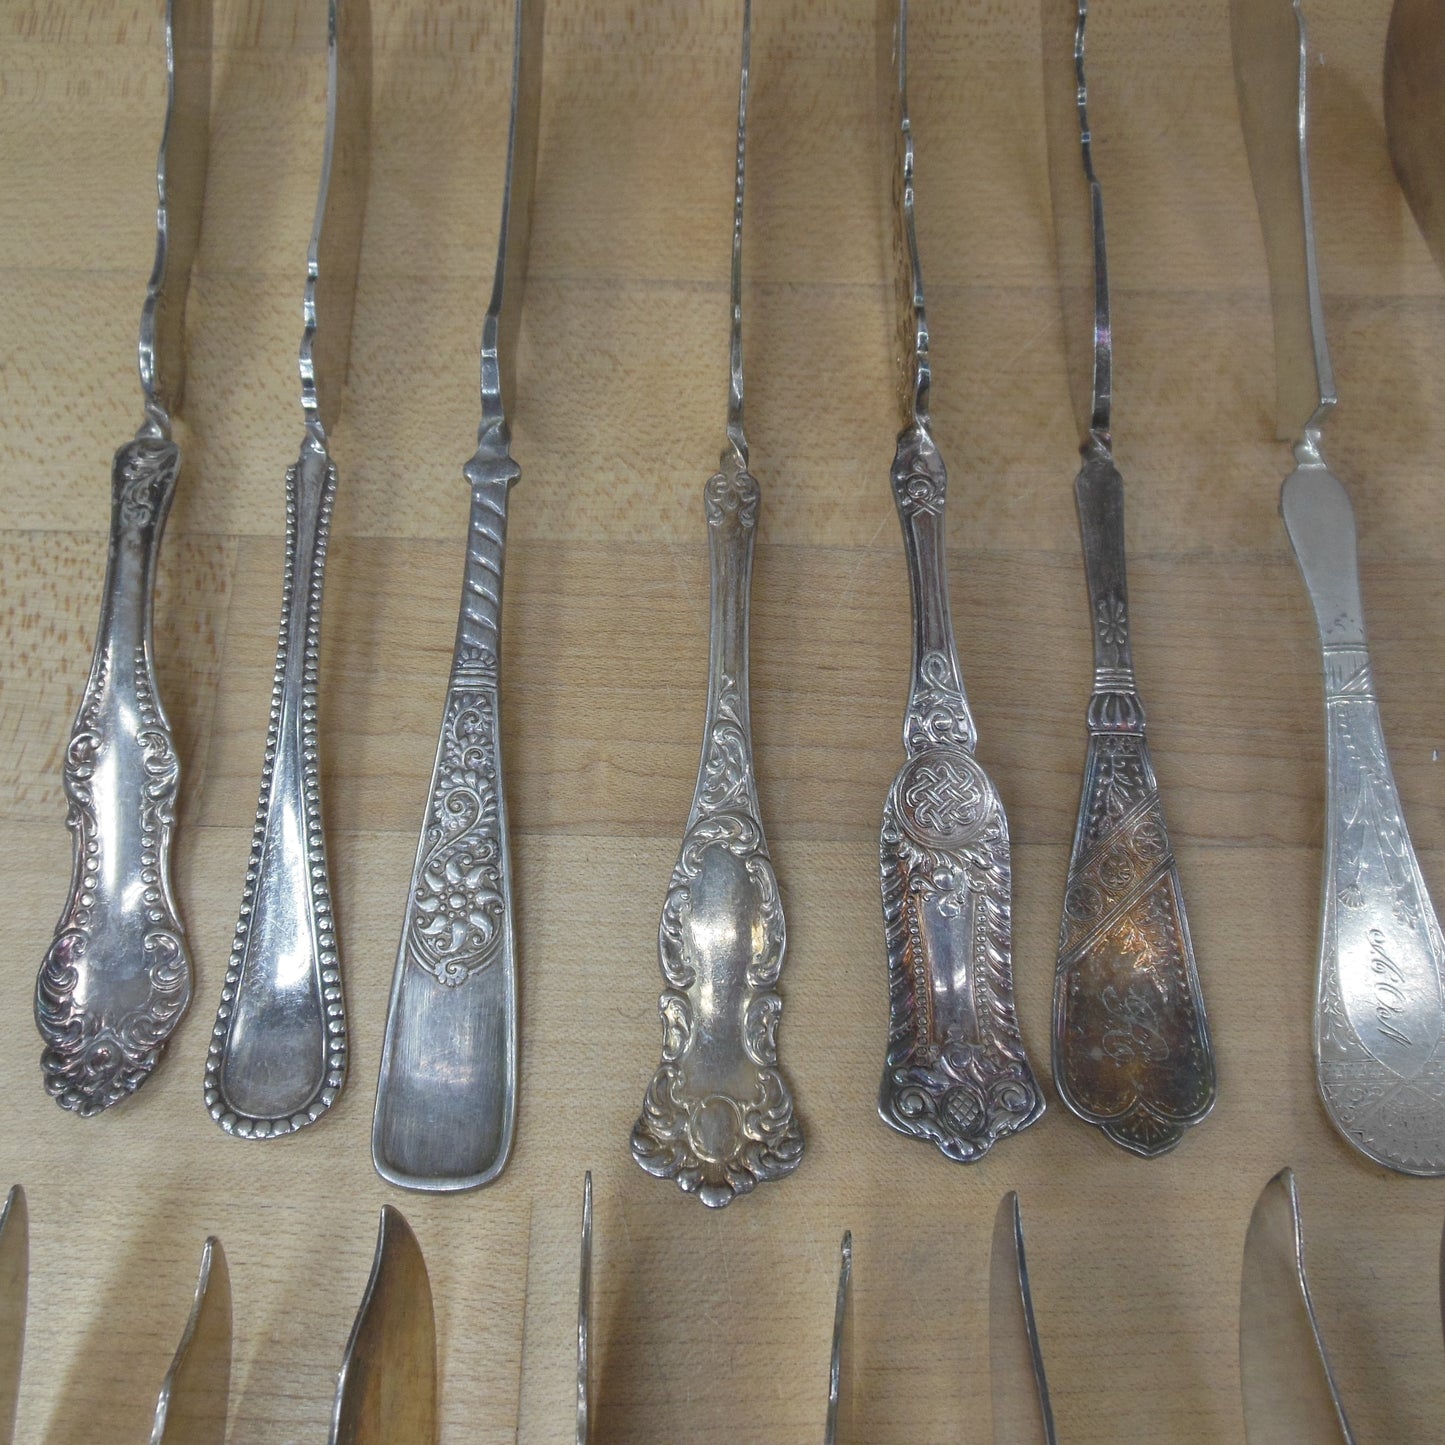 Antique Mixed Master Collection 33 Silverplate Master Butter Knives Twist Rogers